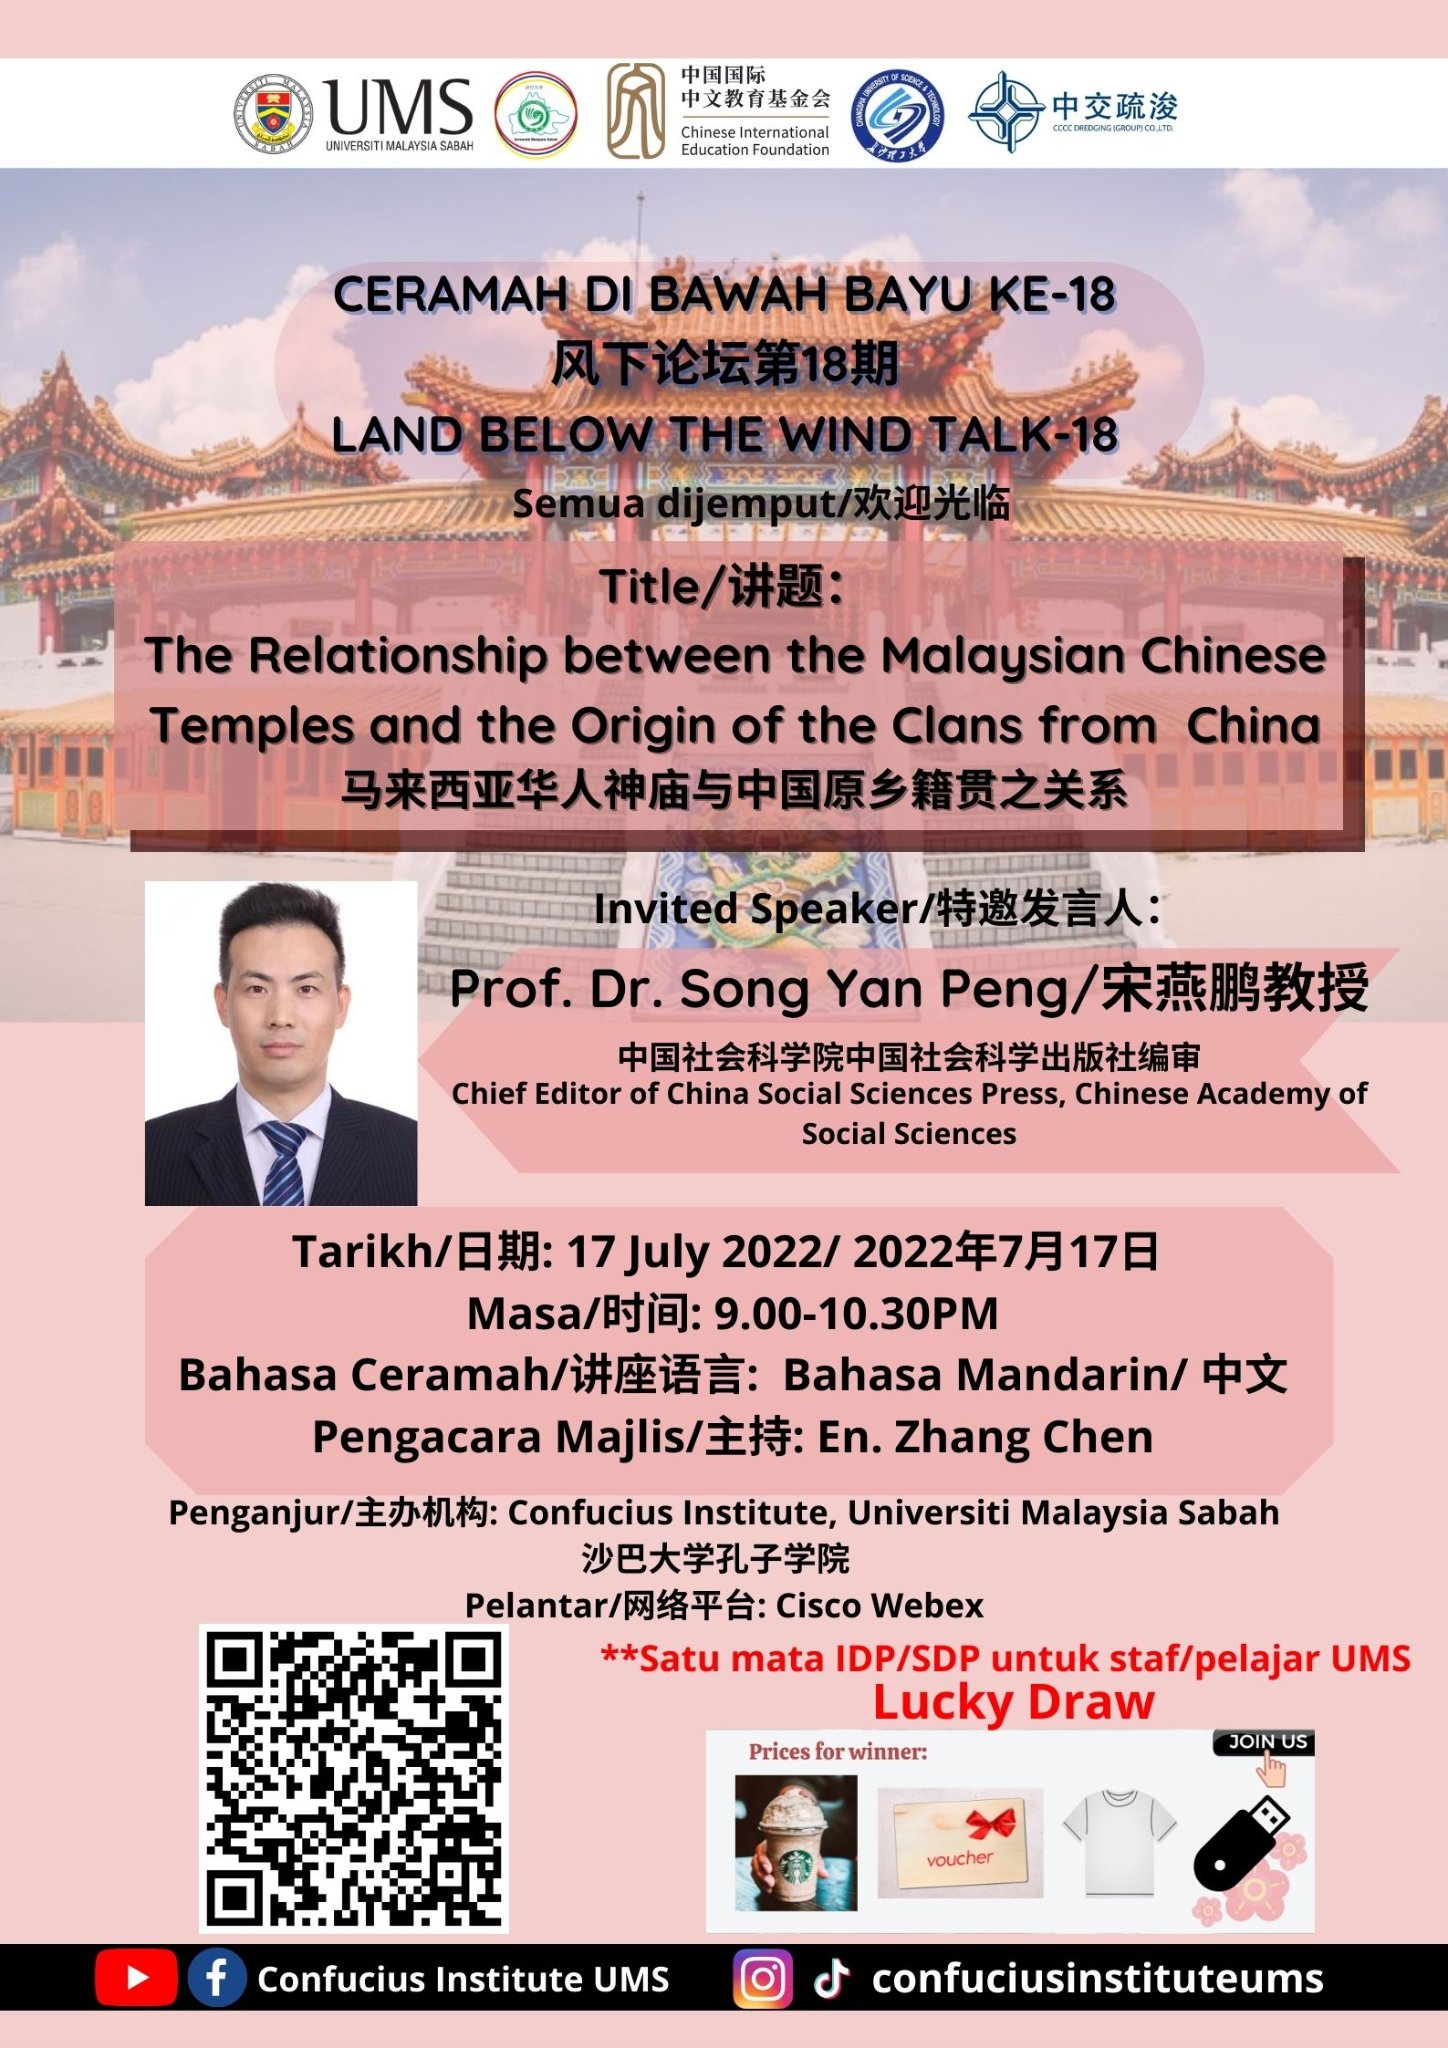 Land Below the Wind Talk 18: The Relationship betweenn the Malaysian Chinese Temples and the Origin of the Clans from China